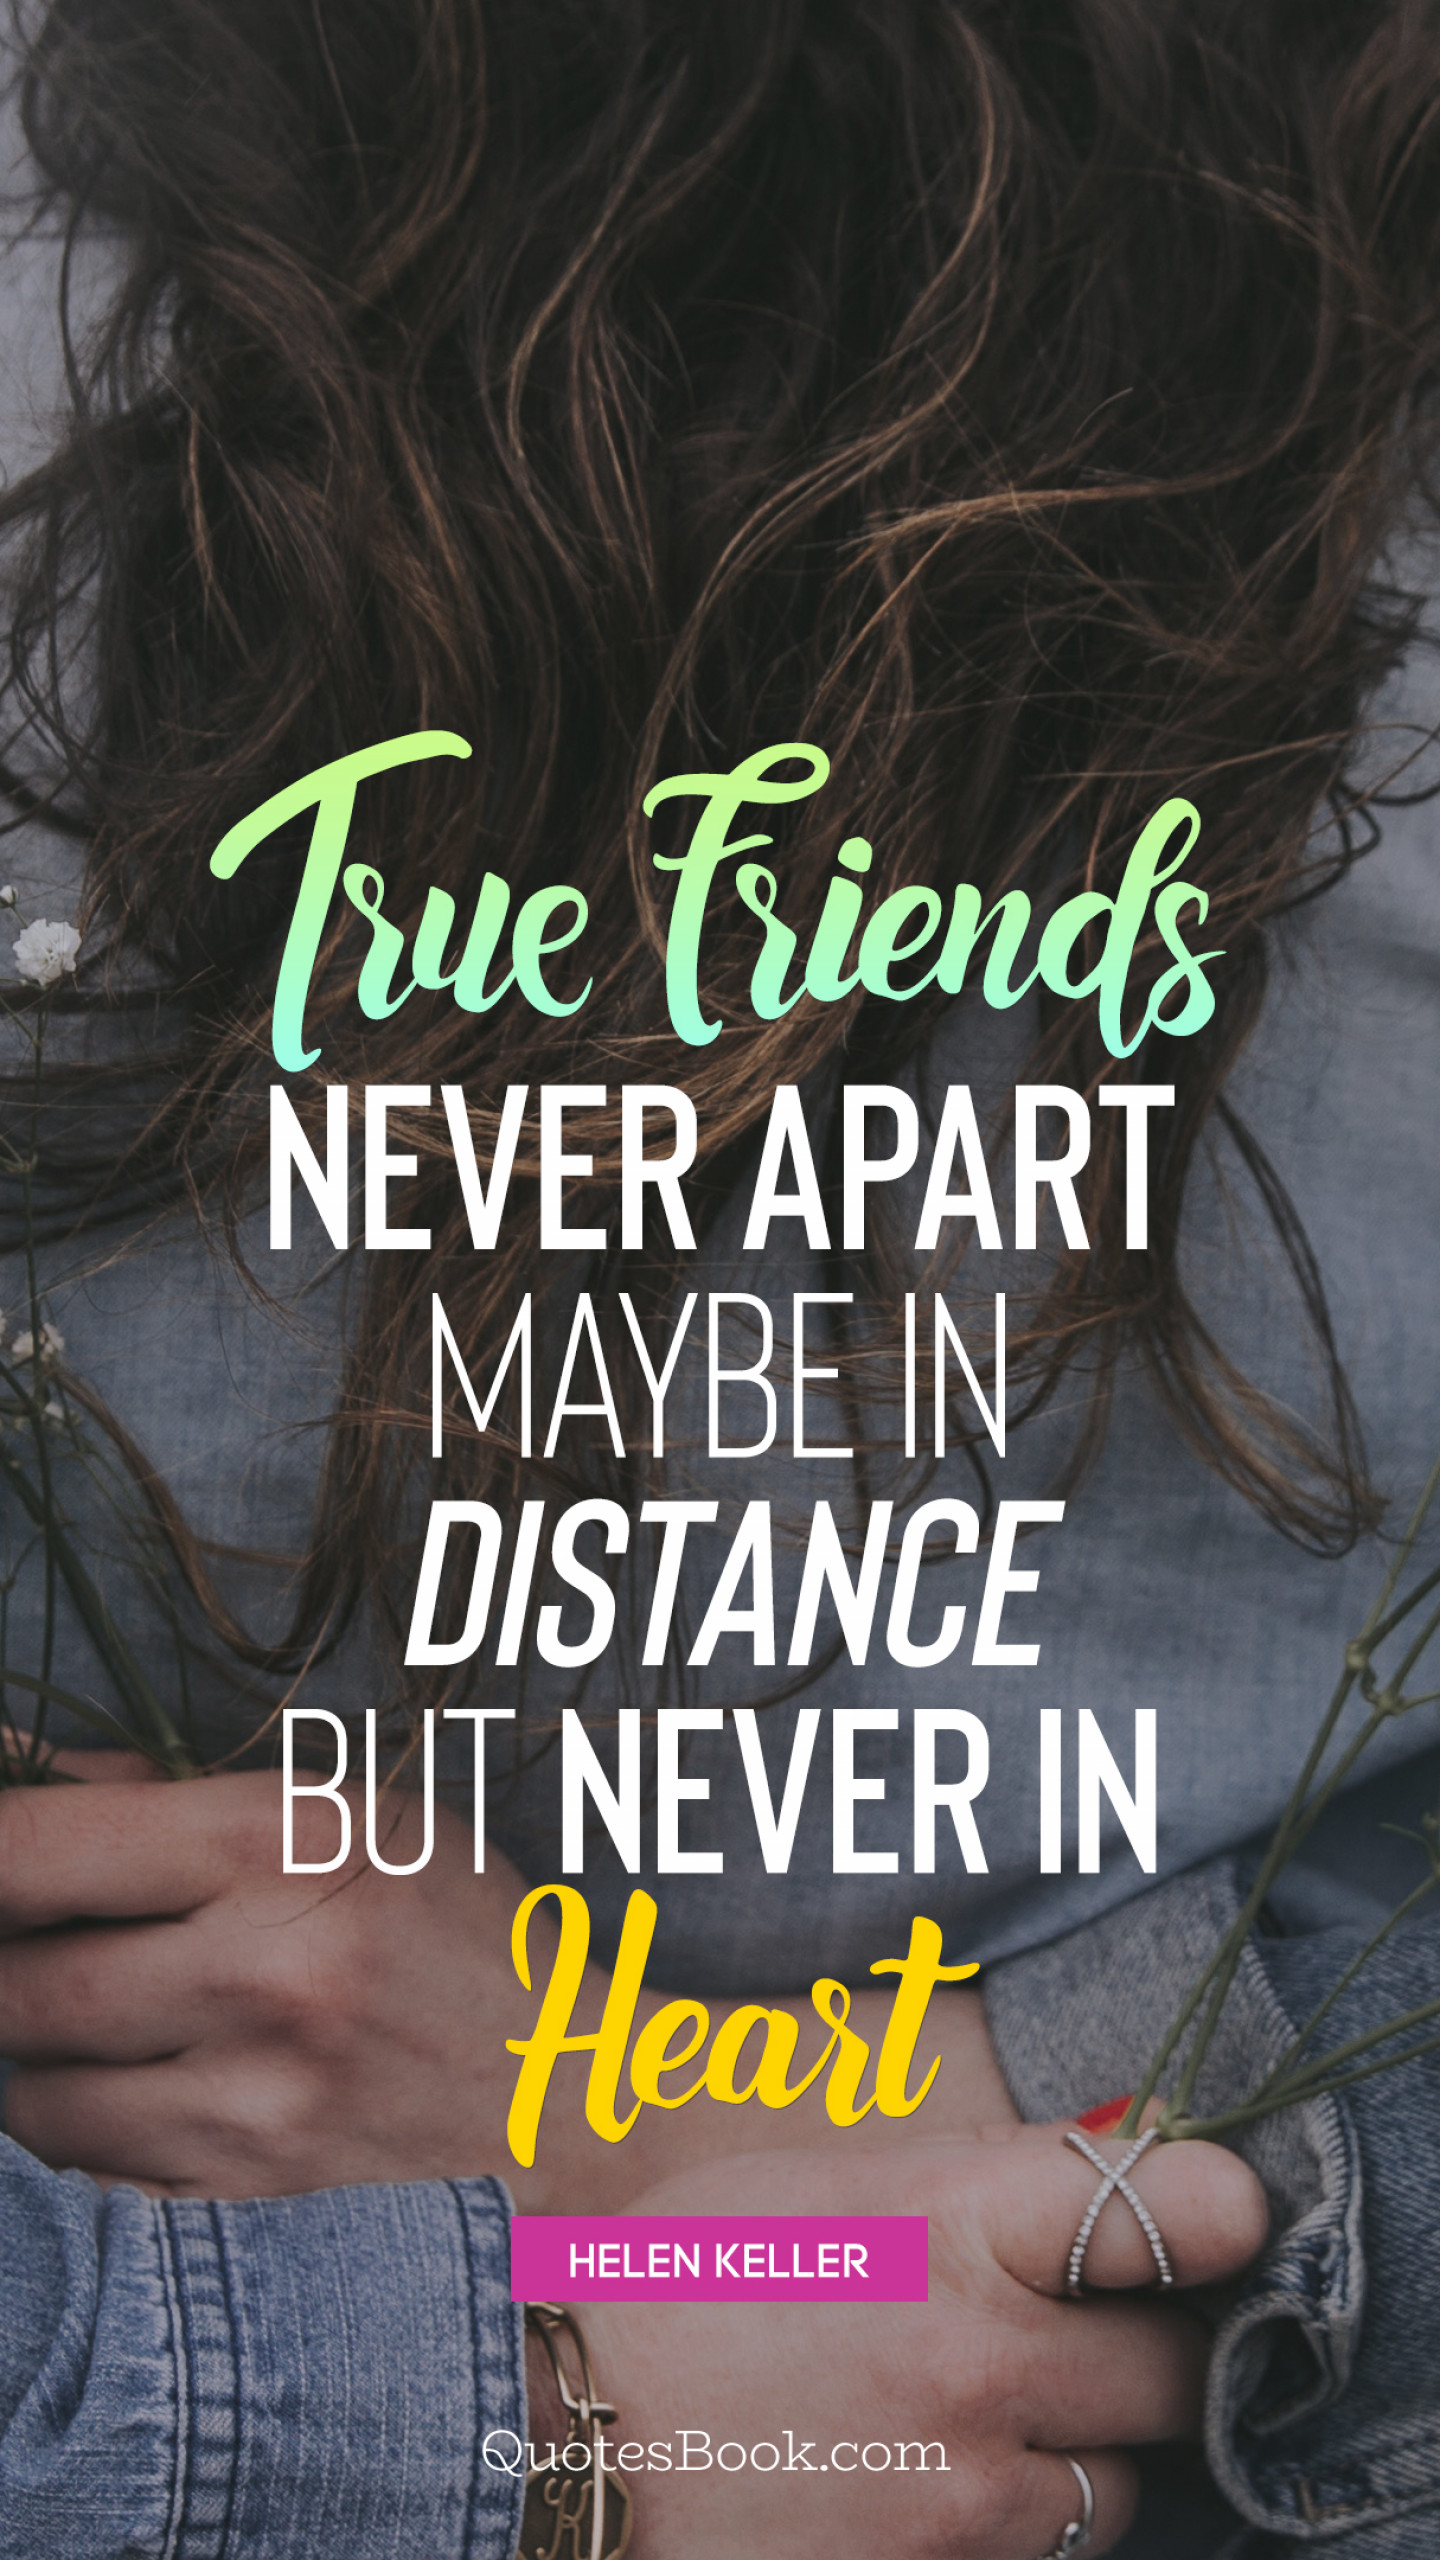 True friends never apart maybe in distance but never in